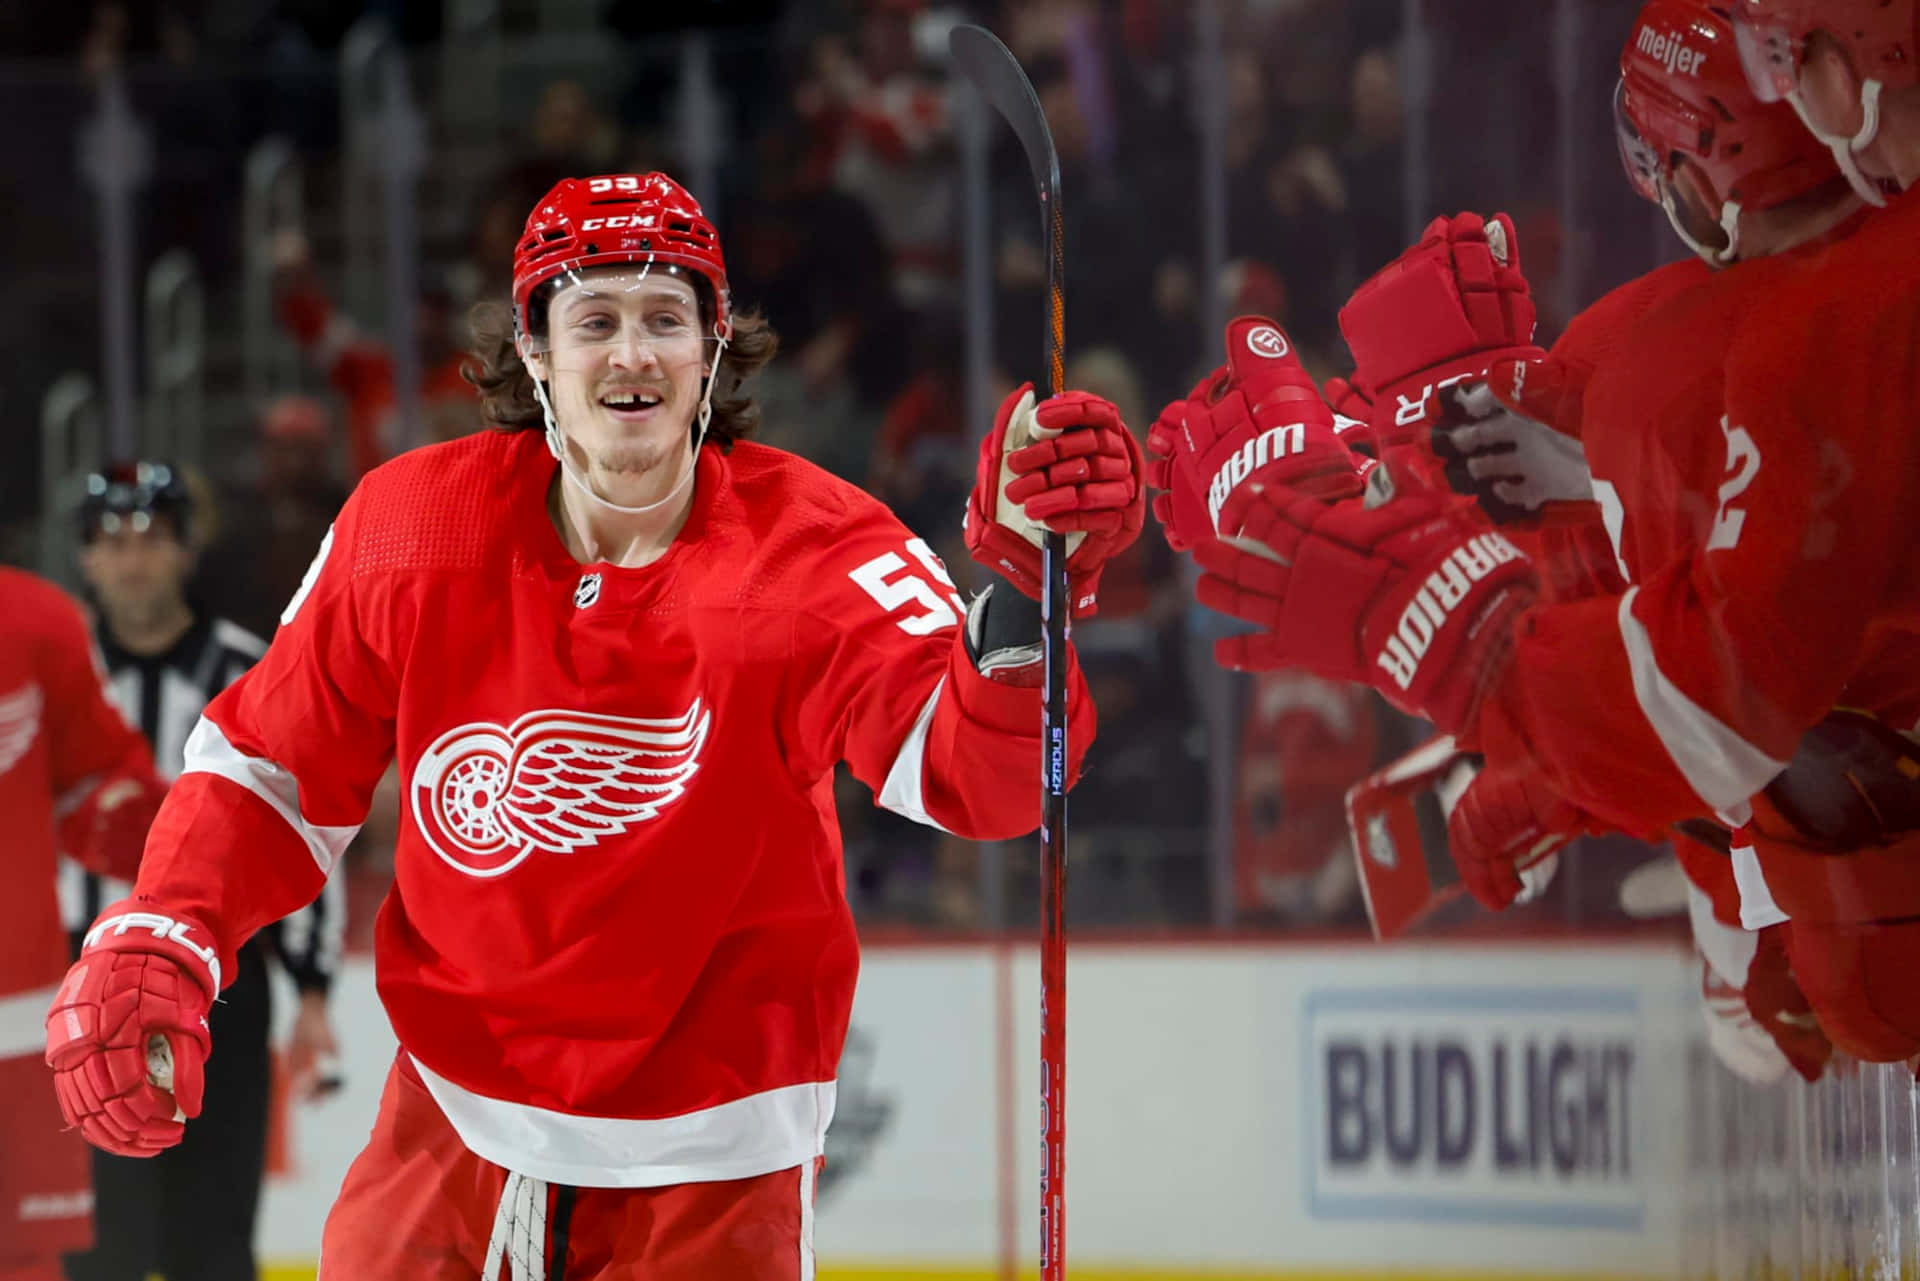 Tyler Bertuzzi in action during a game Wallpaper